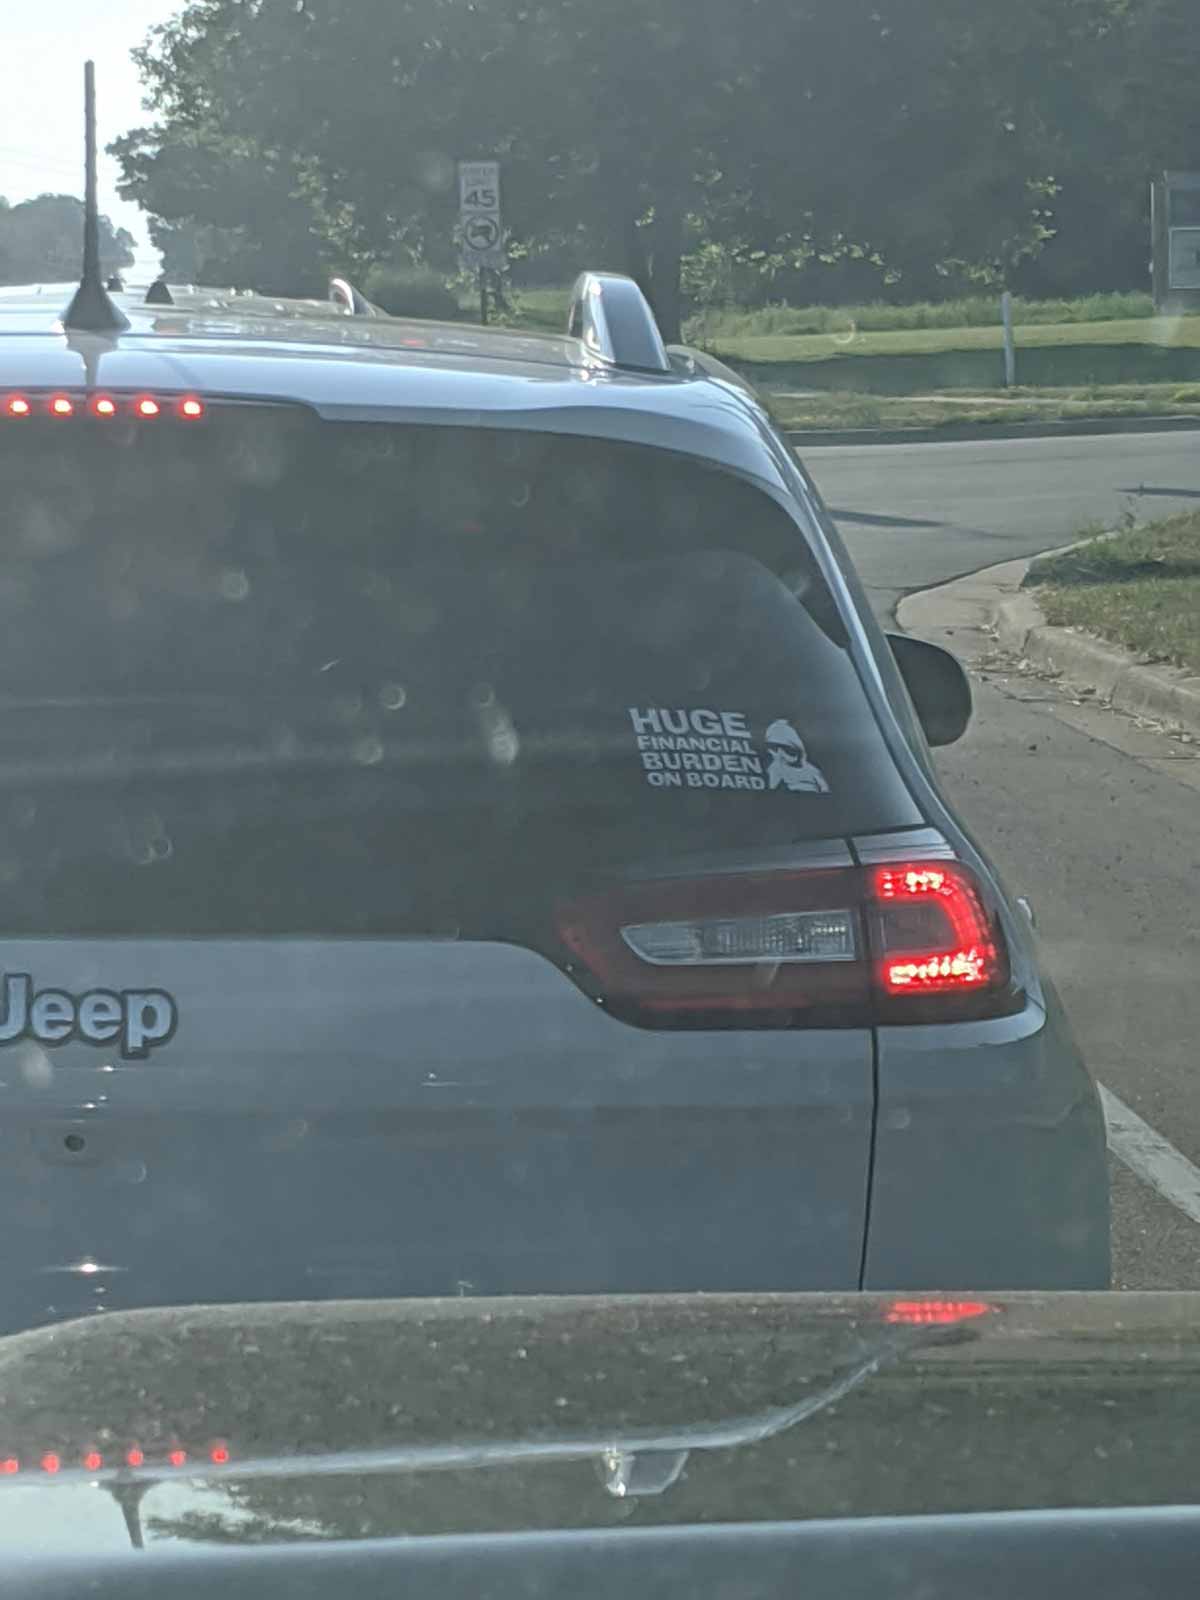 Funny sticker on the back of a jeep that says 'huge financial burden on board' and a picture of a baby